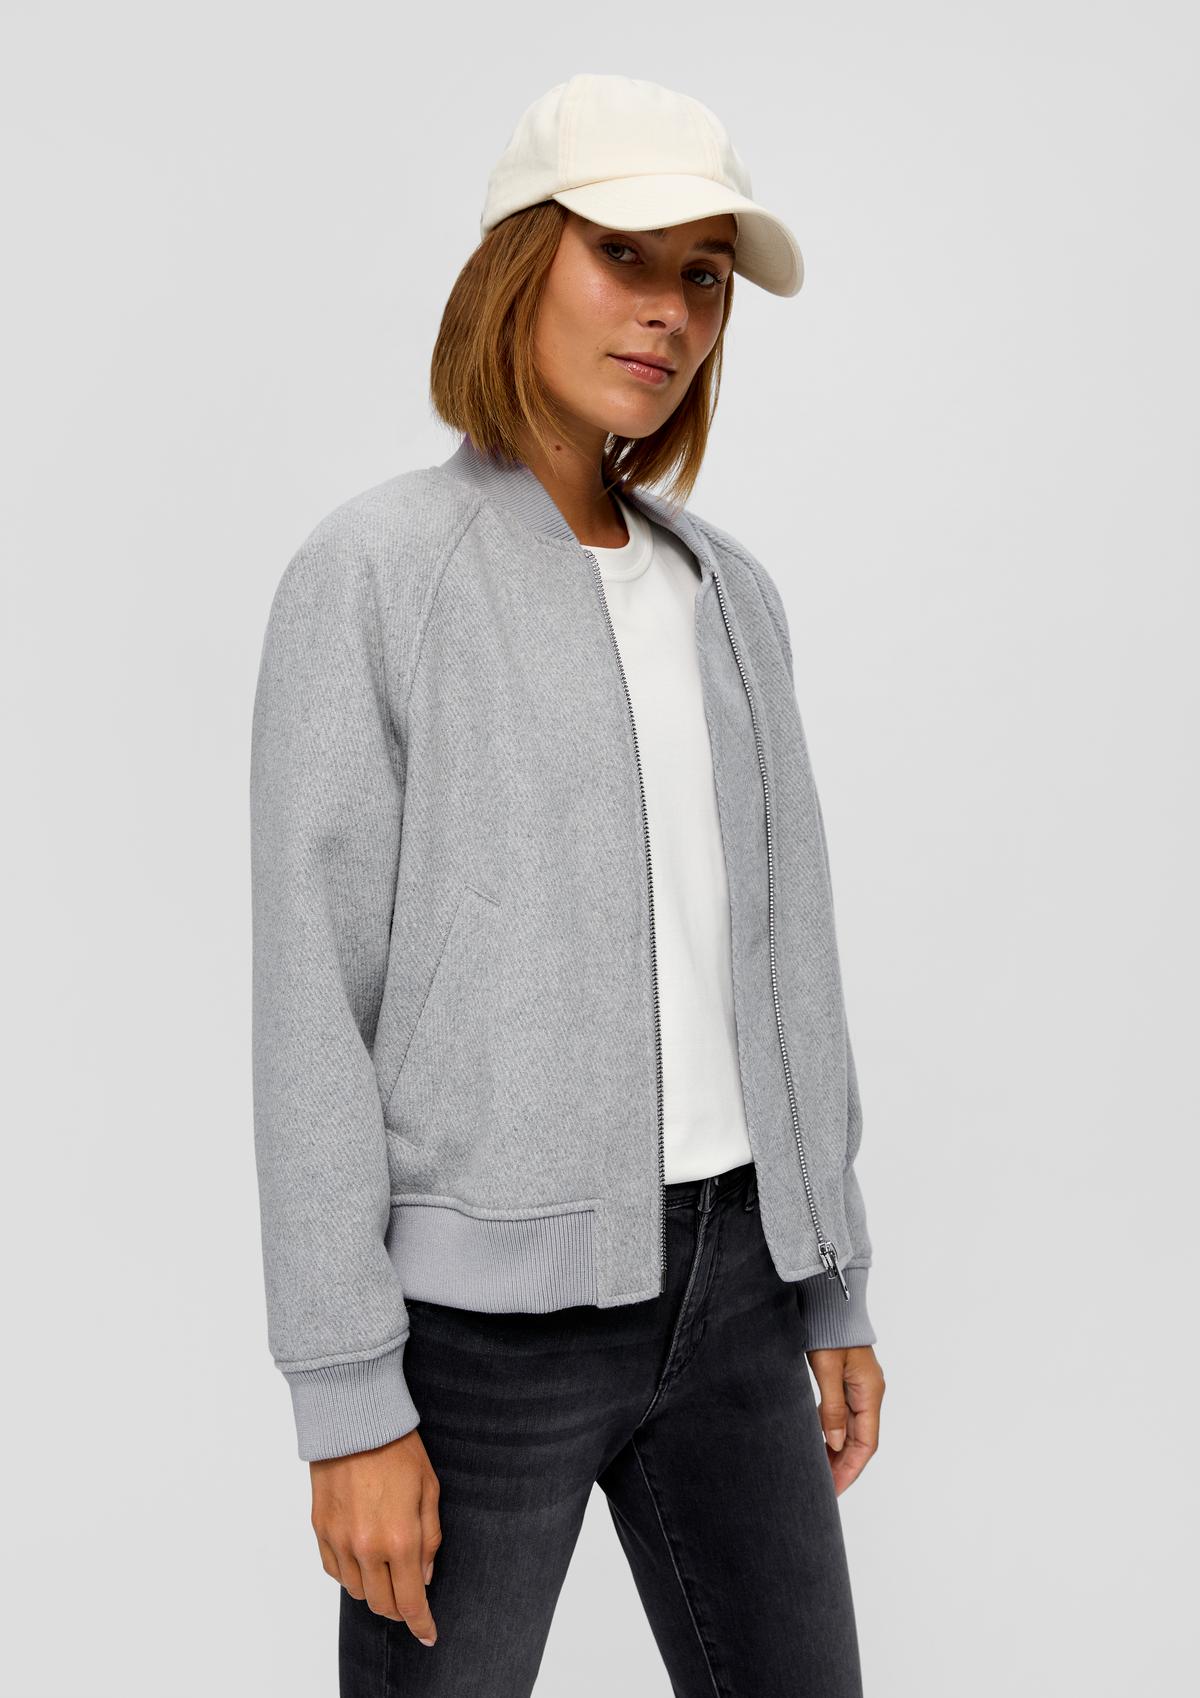 Outdoor jacket in a wool blend